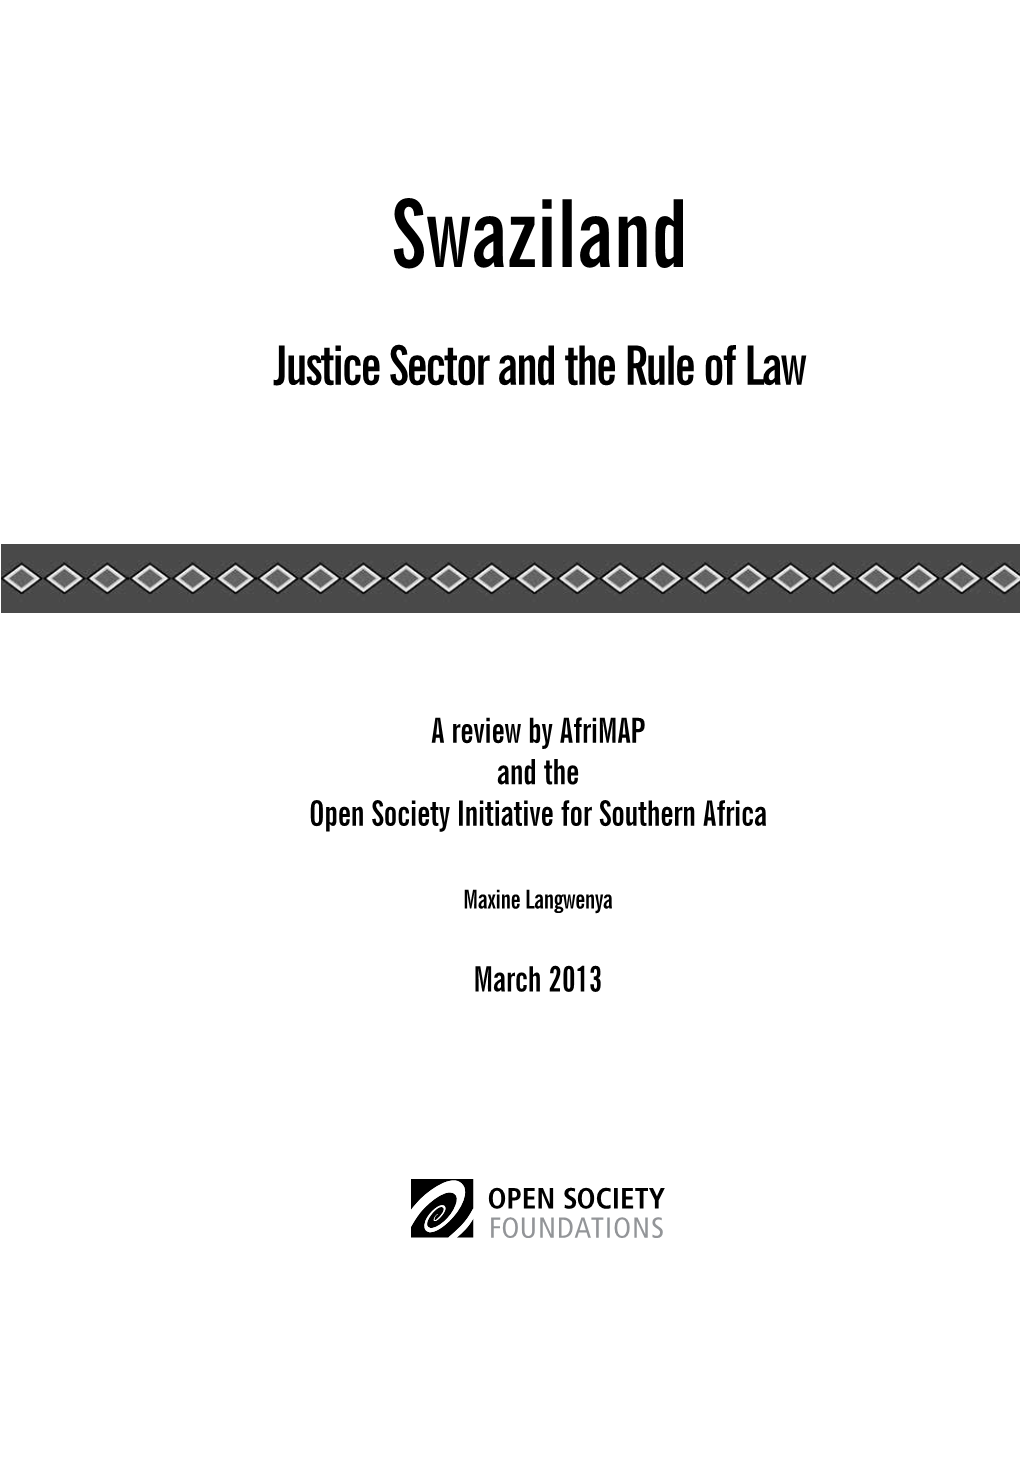 Swaziland Justice Sector and the Rule of Law